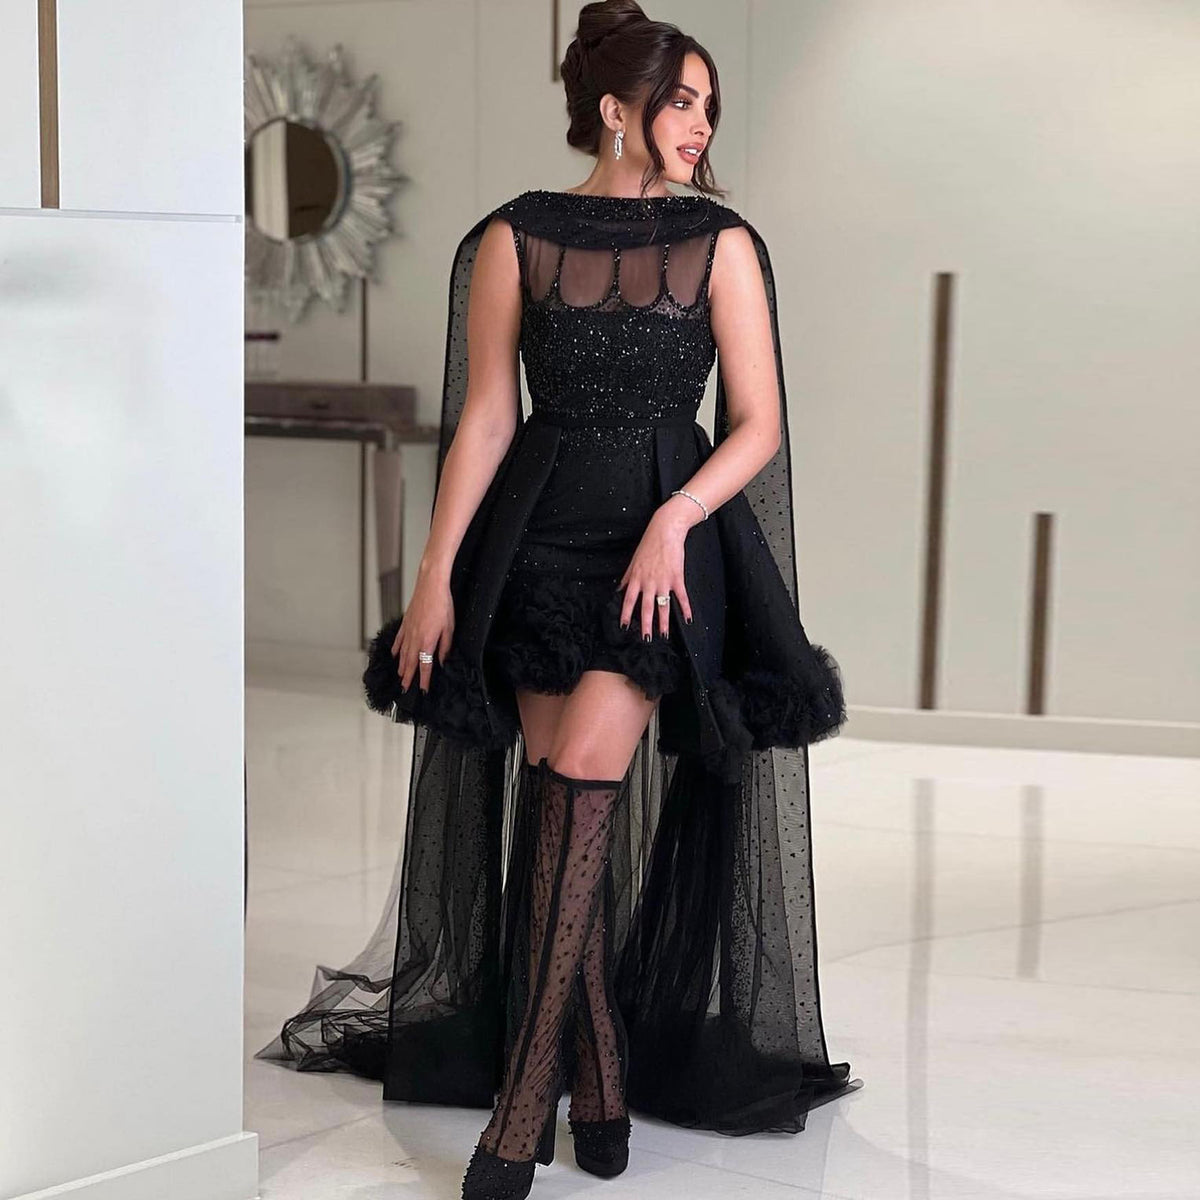 Sharon Said Luxury Crystal Arabic Black Short Evening Dress with Cape Ruffles Mini Cocktail Party Dresses for Women Wedding SS477